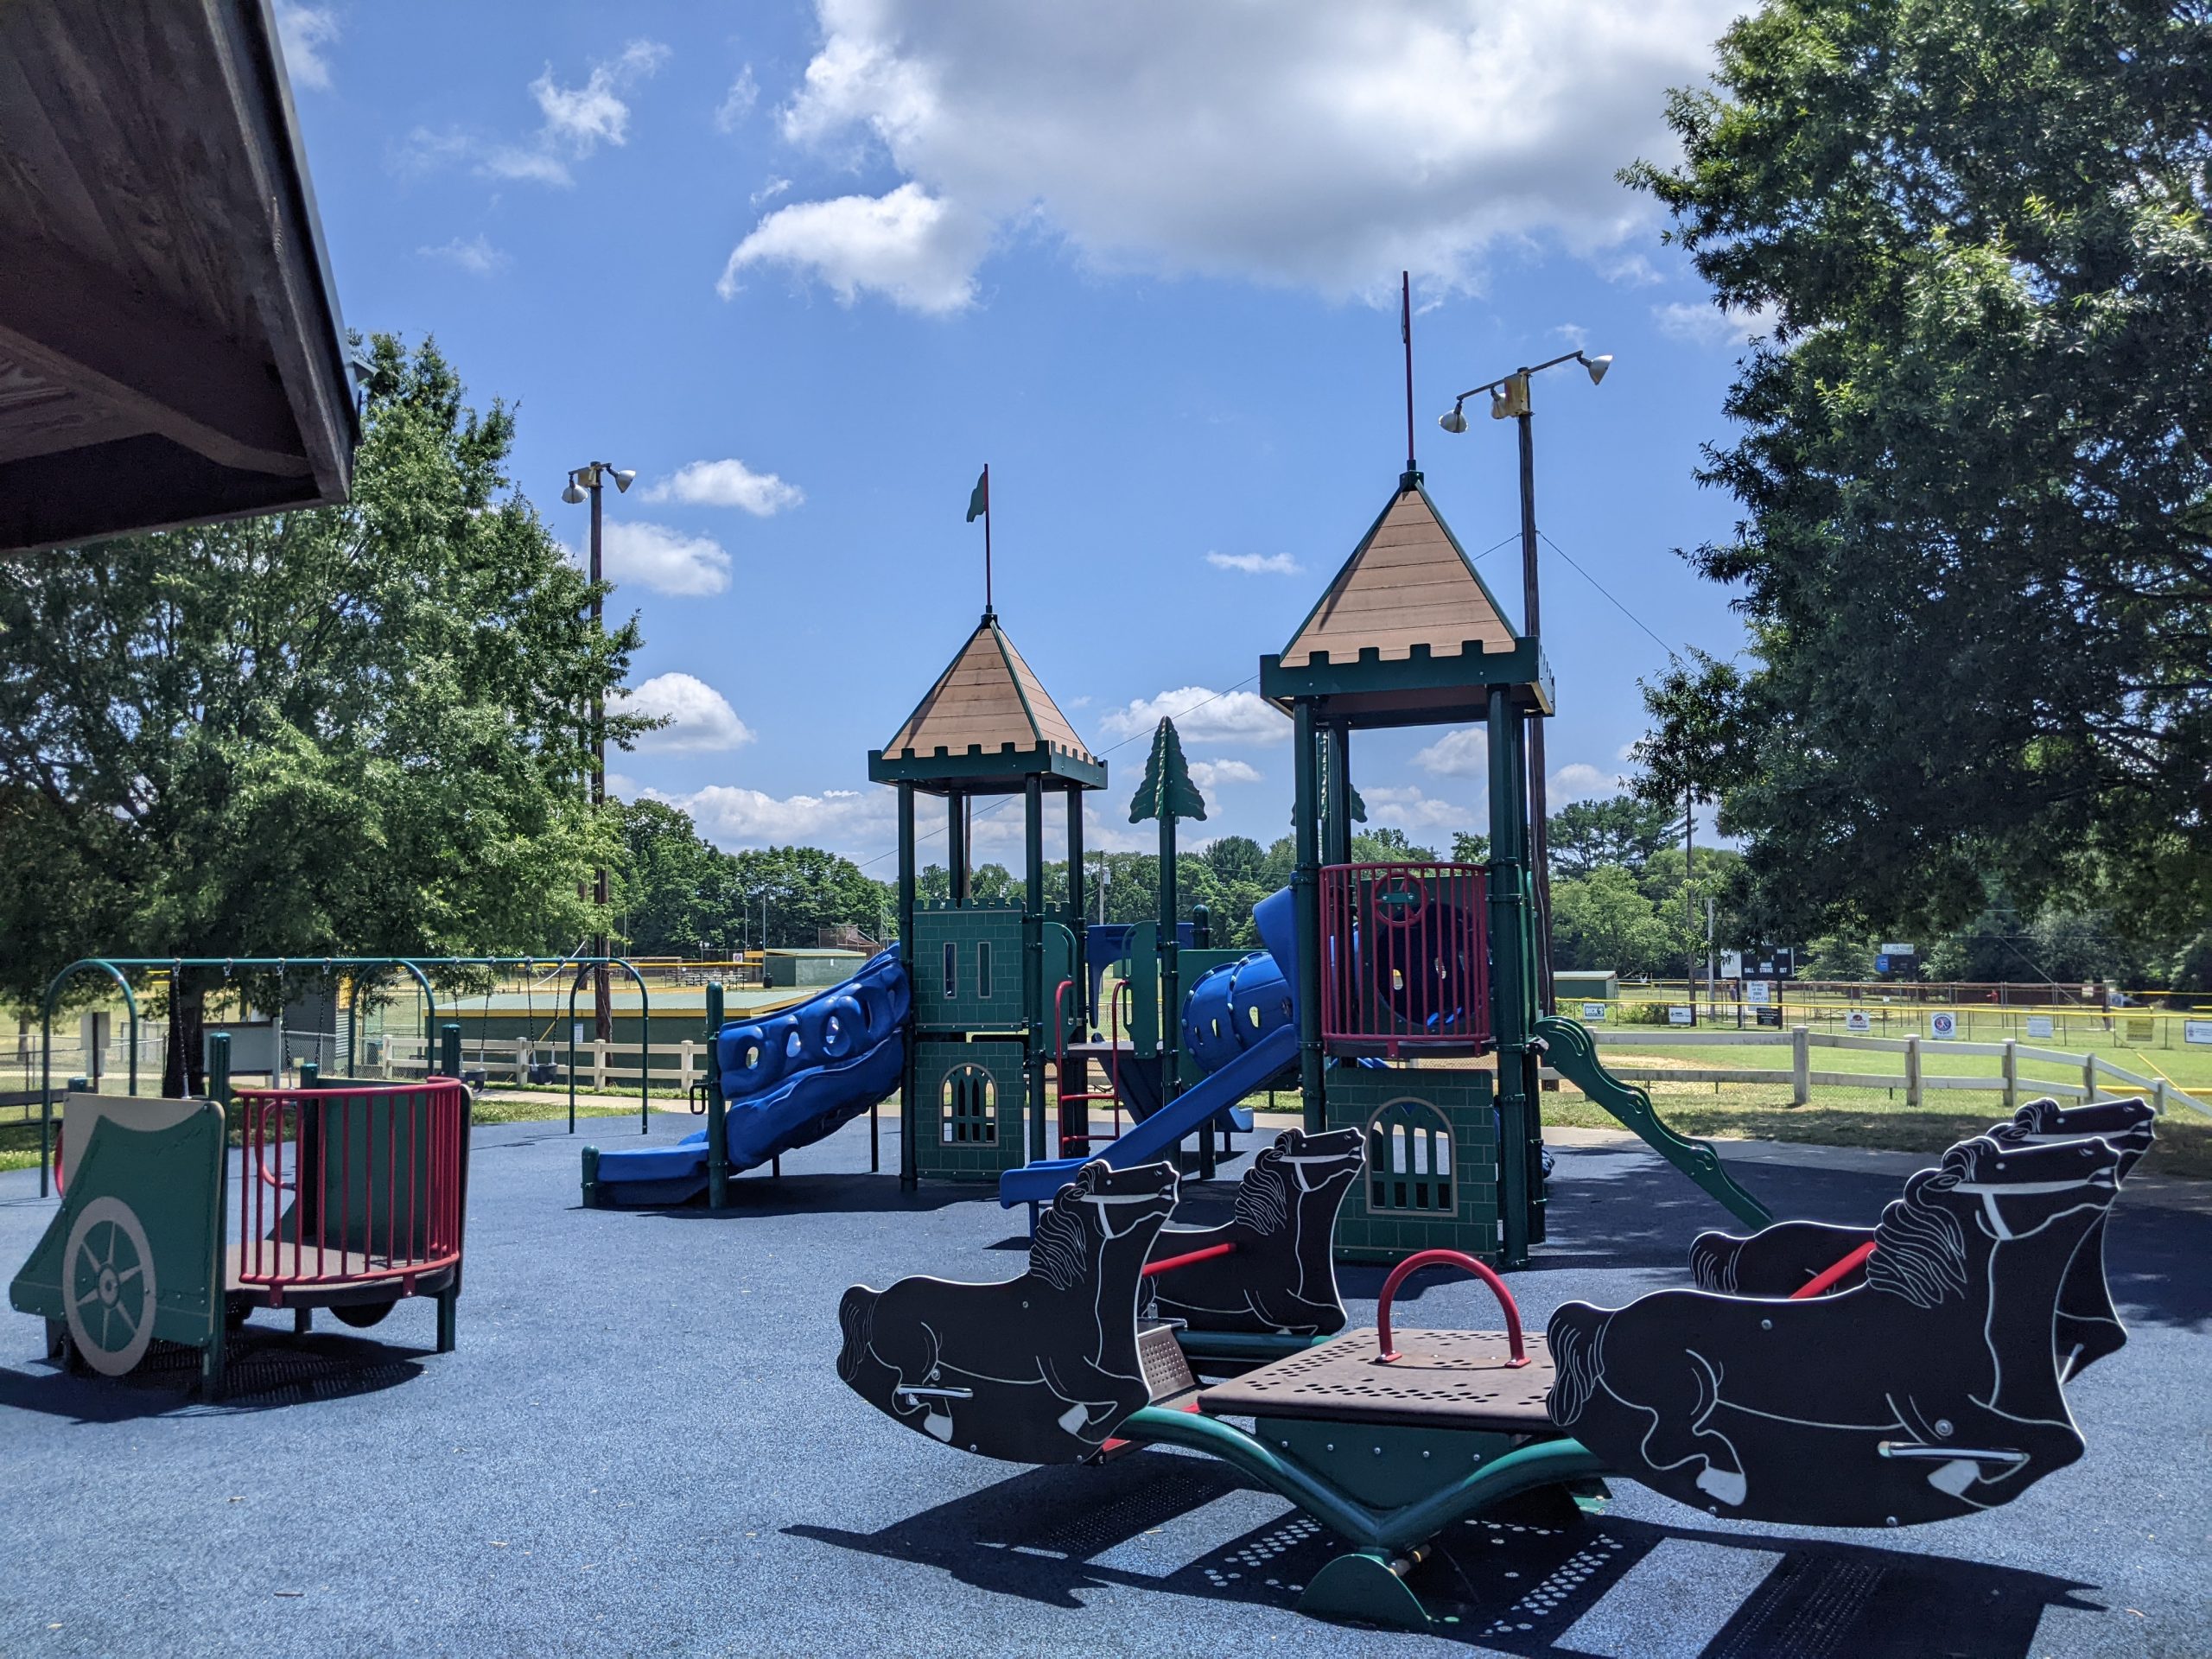 WIDE view of 2-5 Playground with seesaw with horses at Imagination Kingdom in Pemberton Township NJ